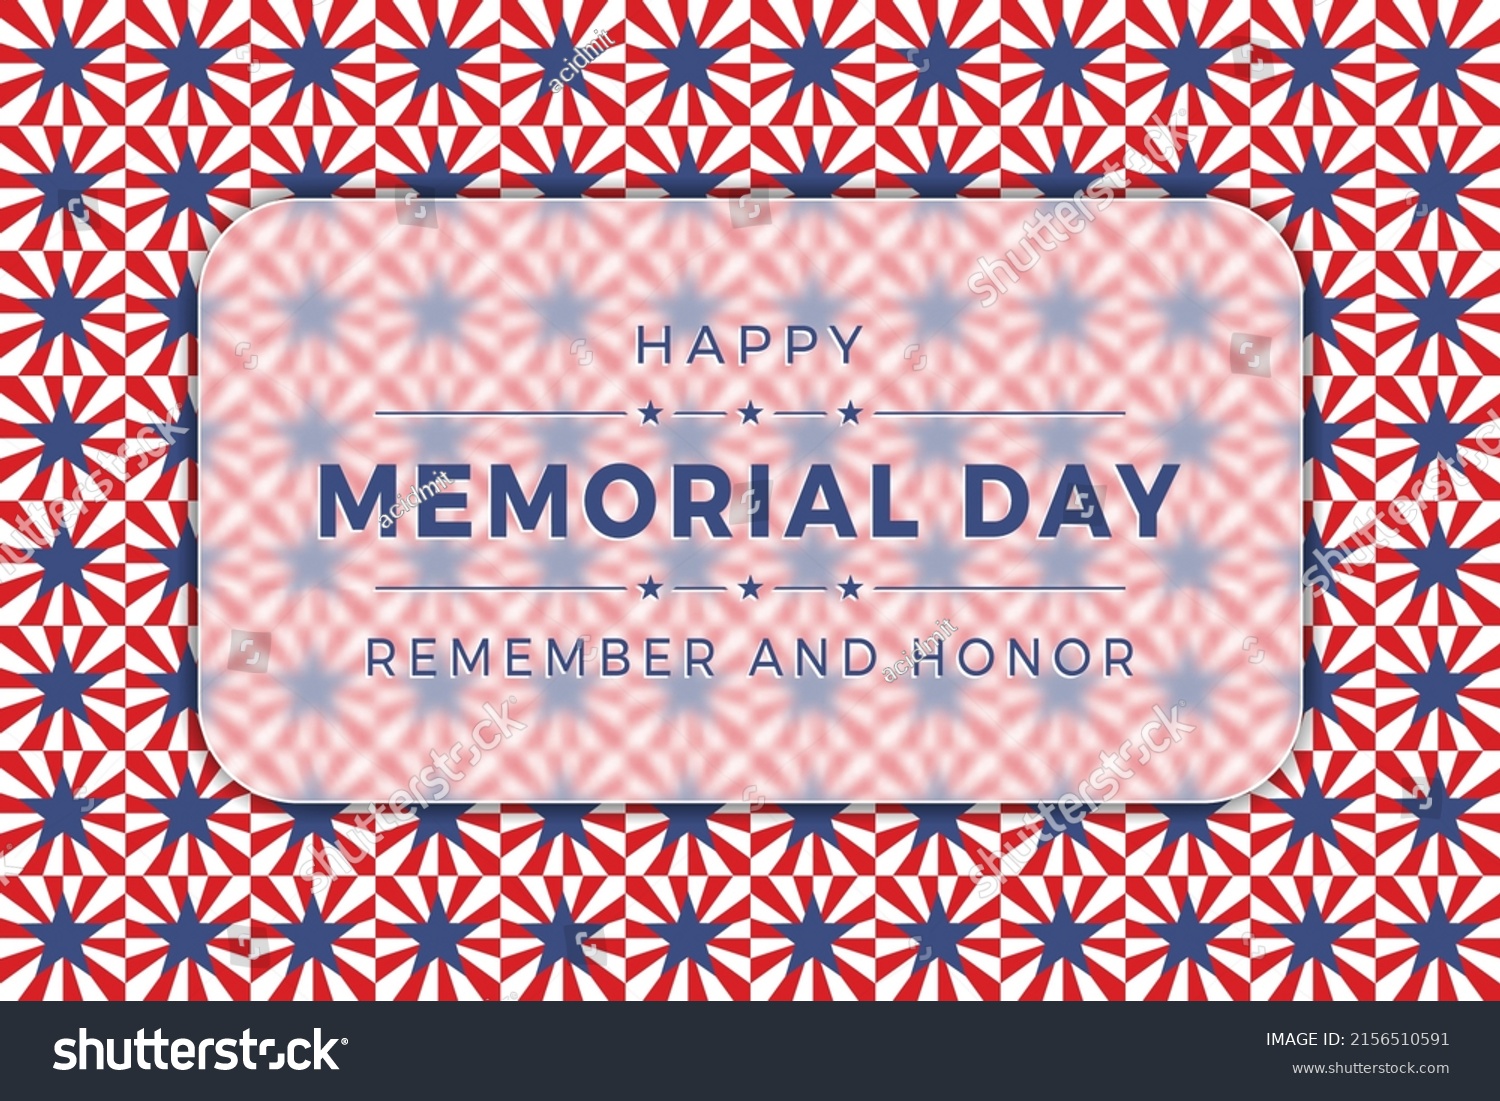 happy-memorial-day-banner-design-layout-stock-vector-royalty-free